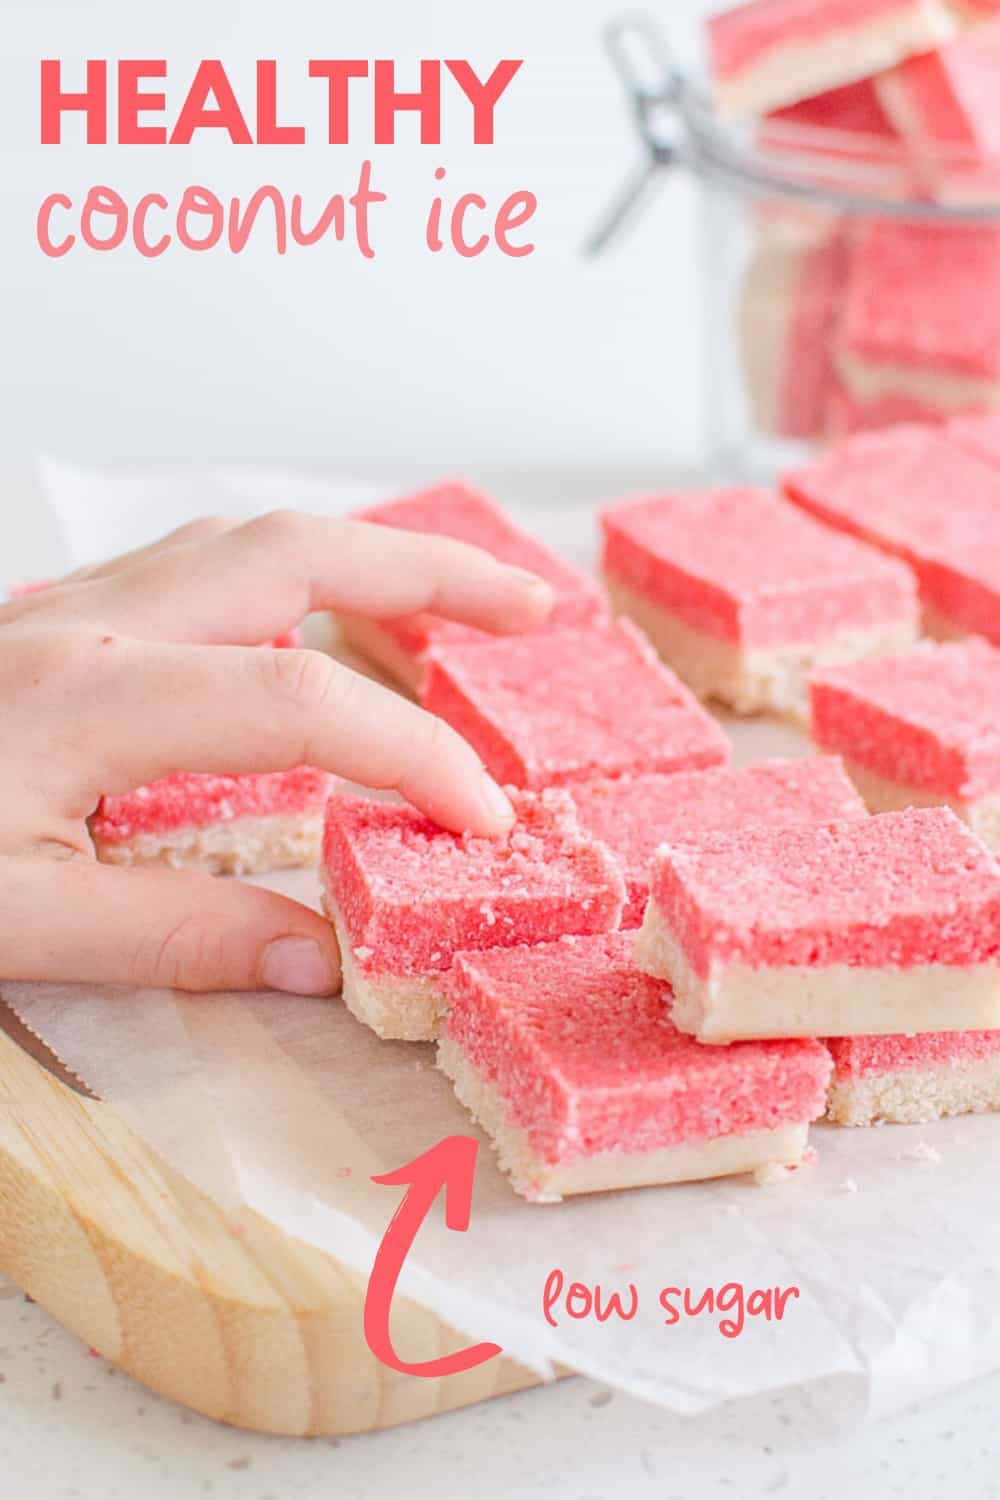 childs hand reaching for a slice of pink and white coconut ice